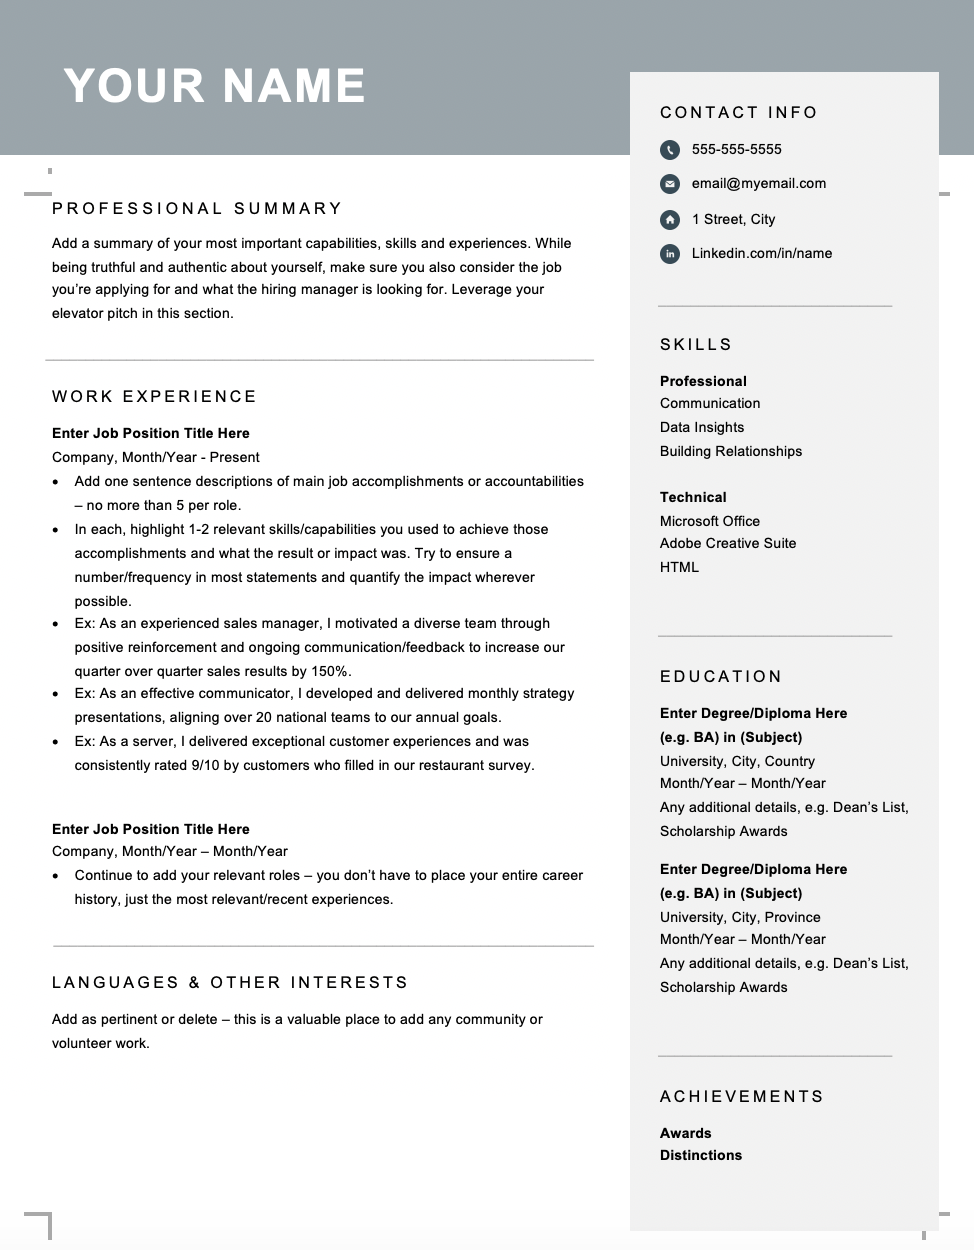 Canadian Resume & Cover Letter Format, Tips & Templates Arrive